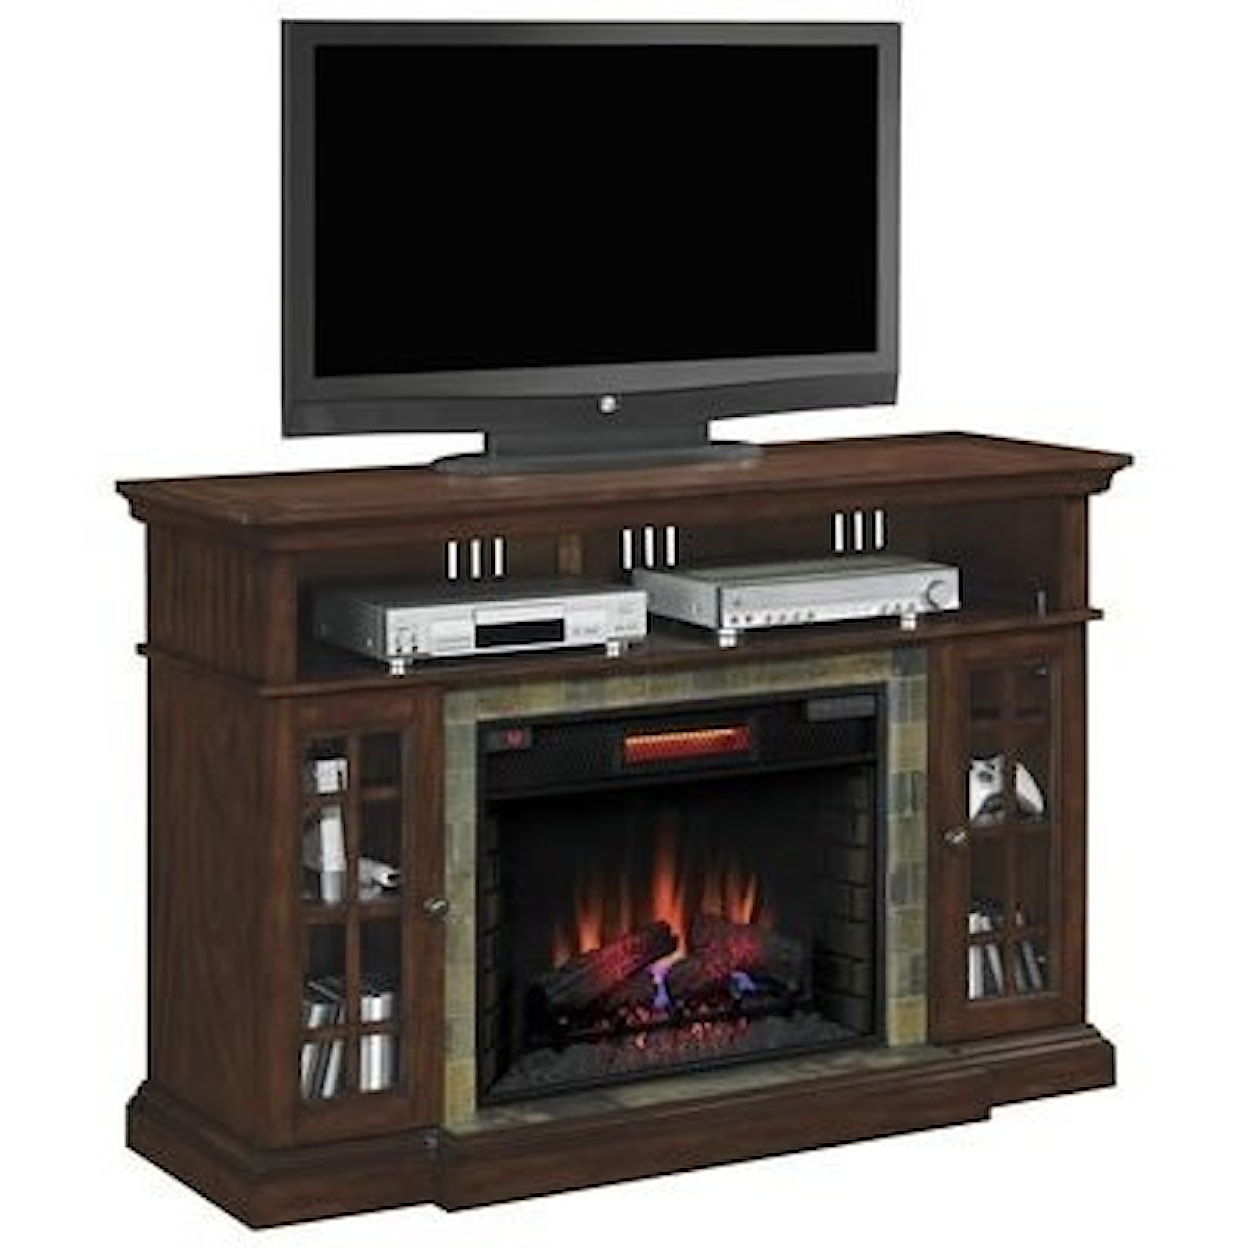 ClassicFlame Lakeland Electric Fireplace